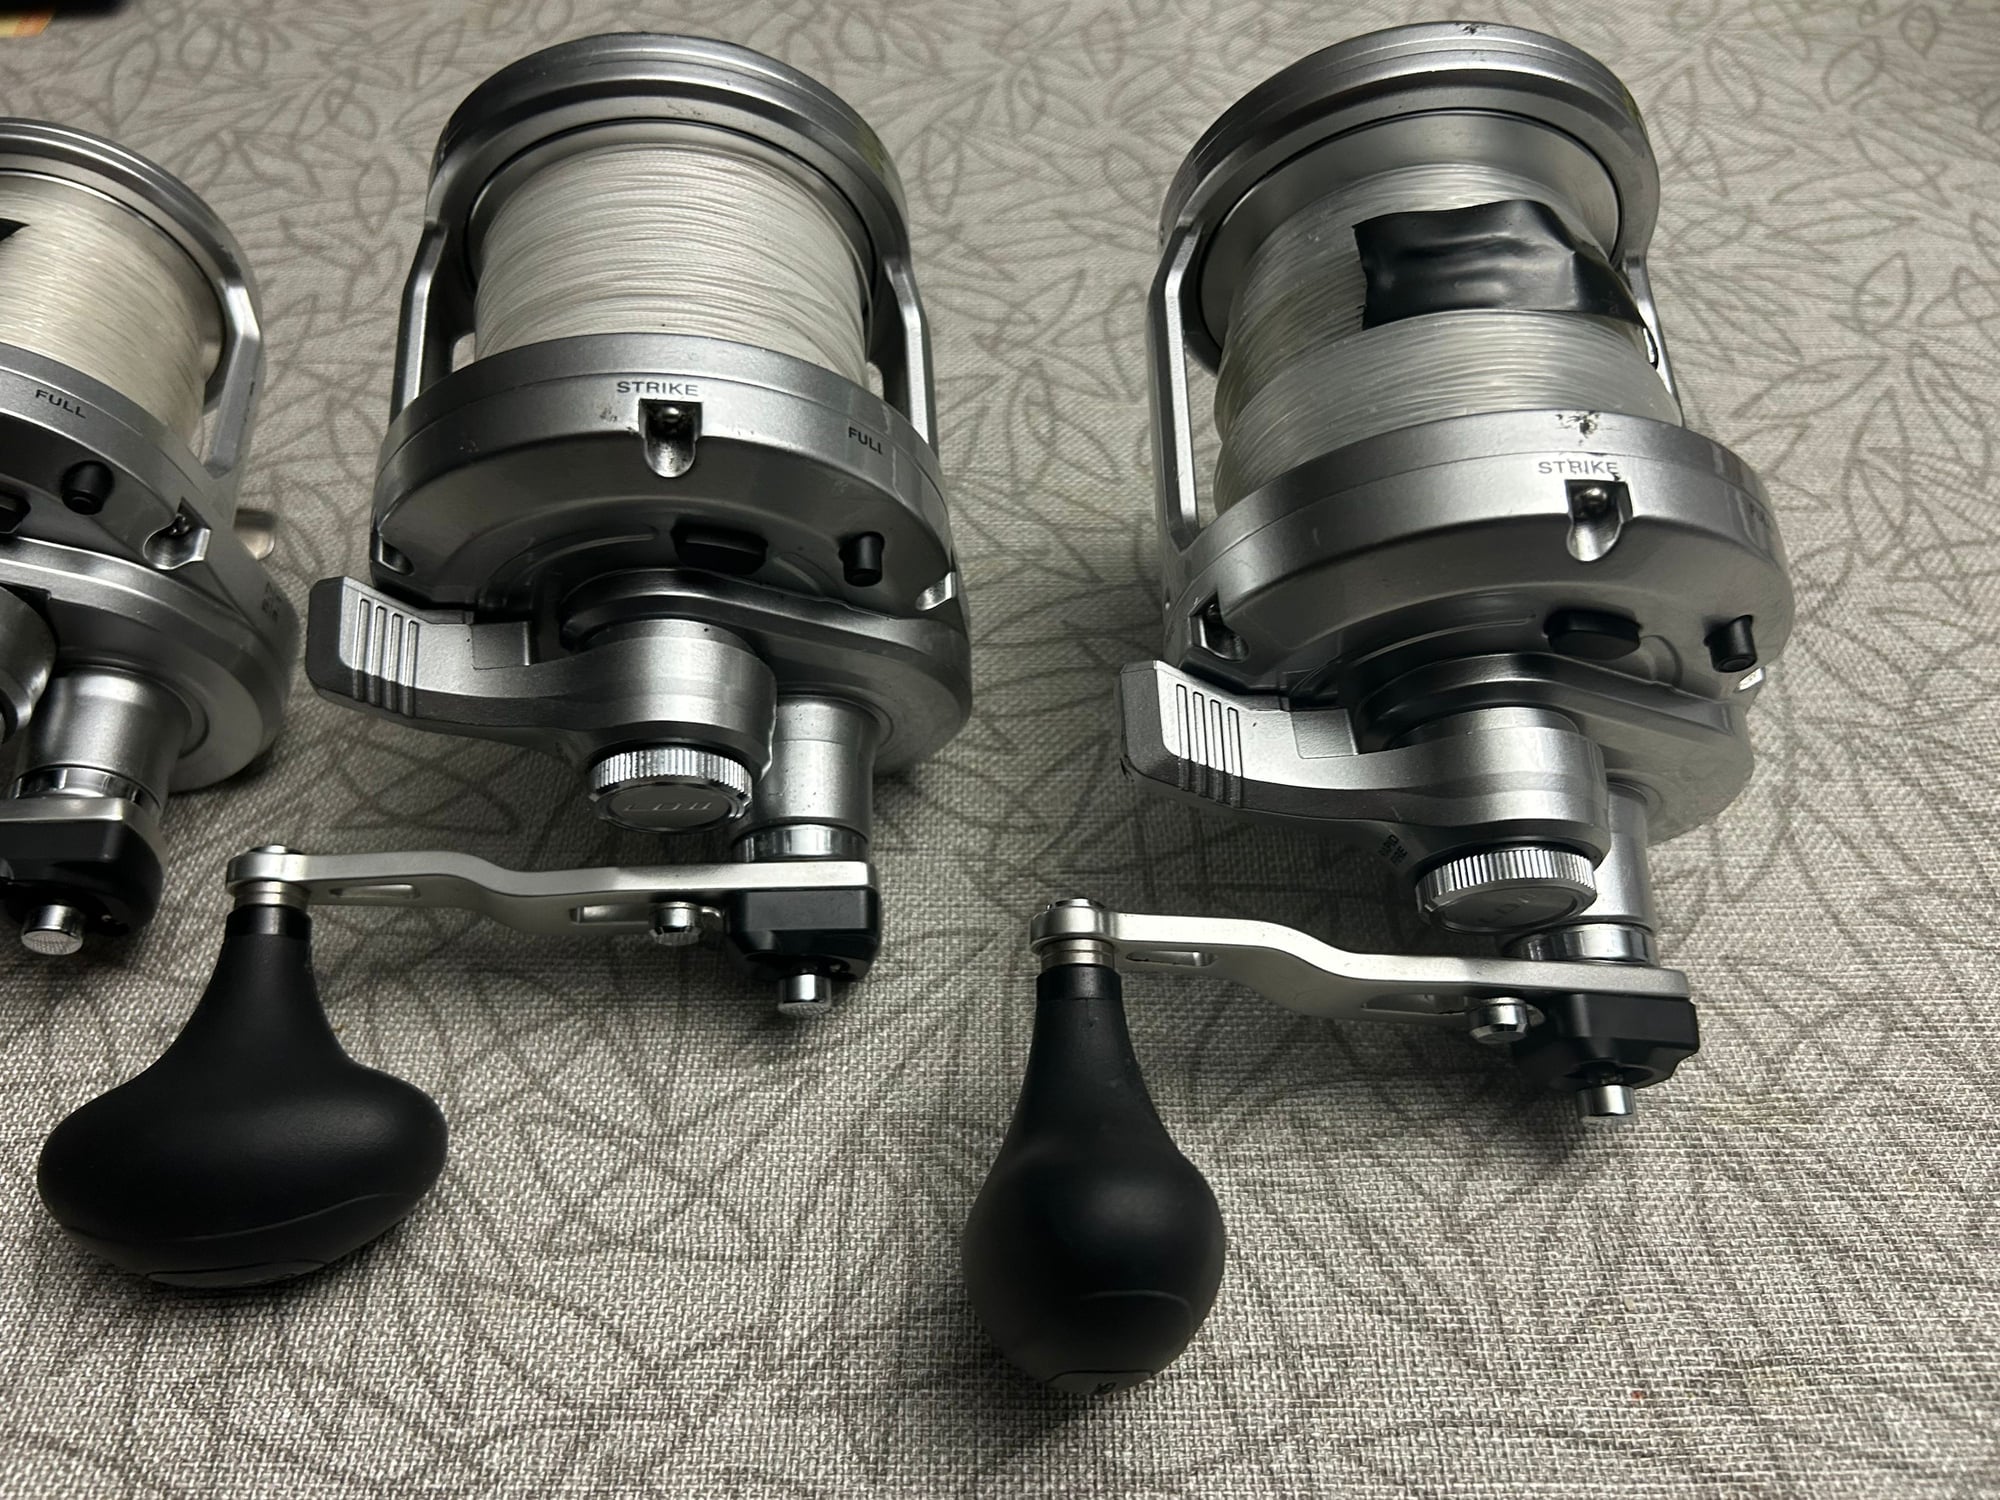 Shimano Speedmaster 16 2 speed x2 - The Hull Truth - Boating and